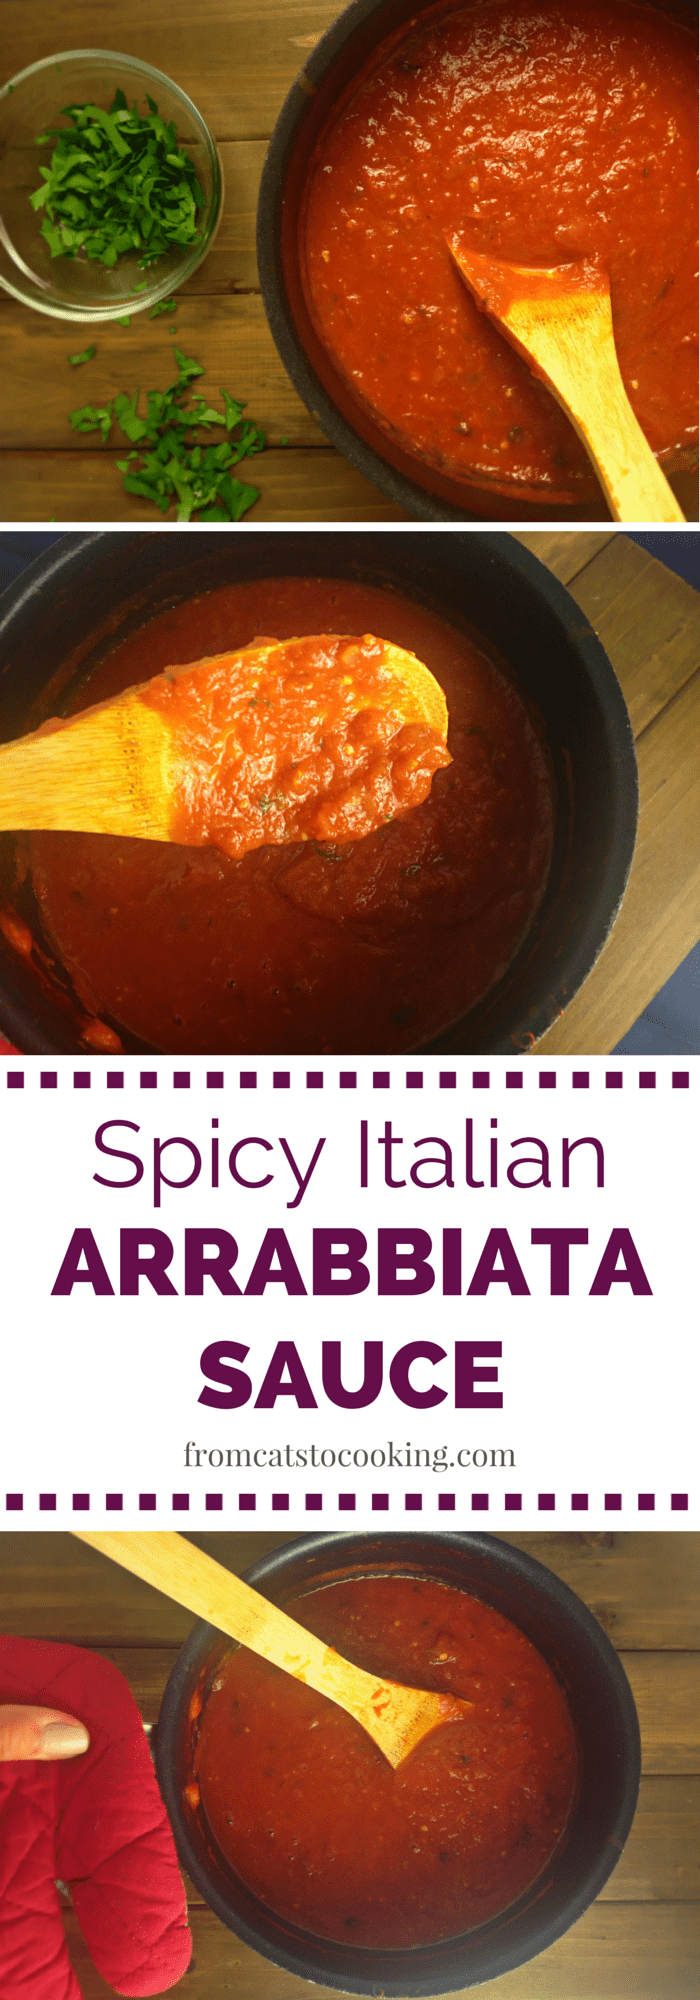 Spicy Italian Arrabbiata Sauce - From Cats to Cooking